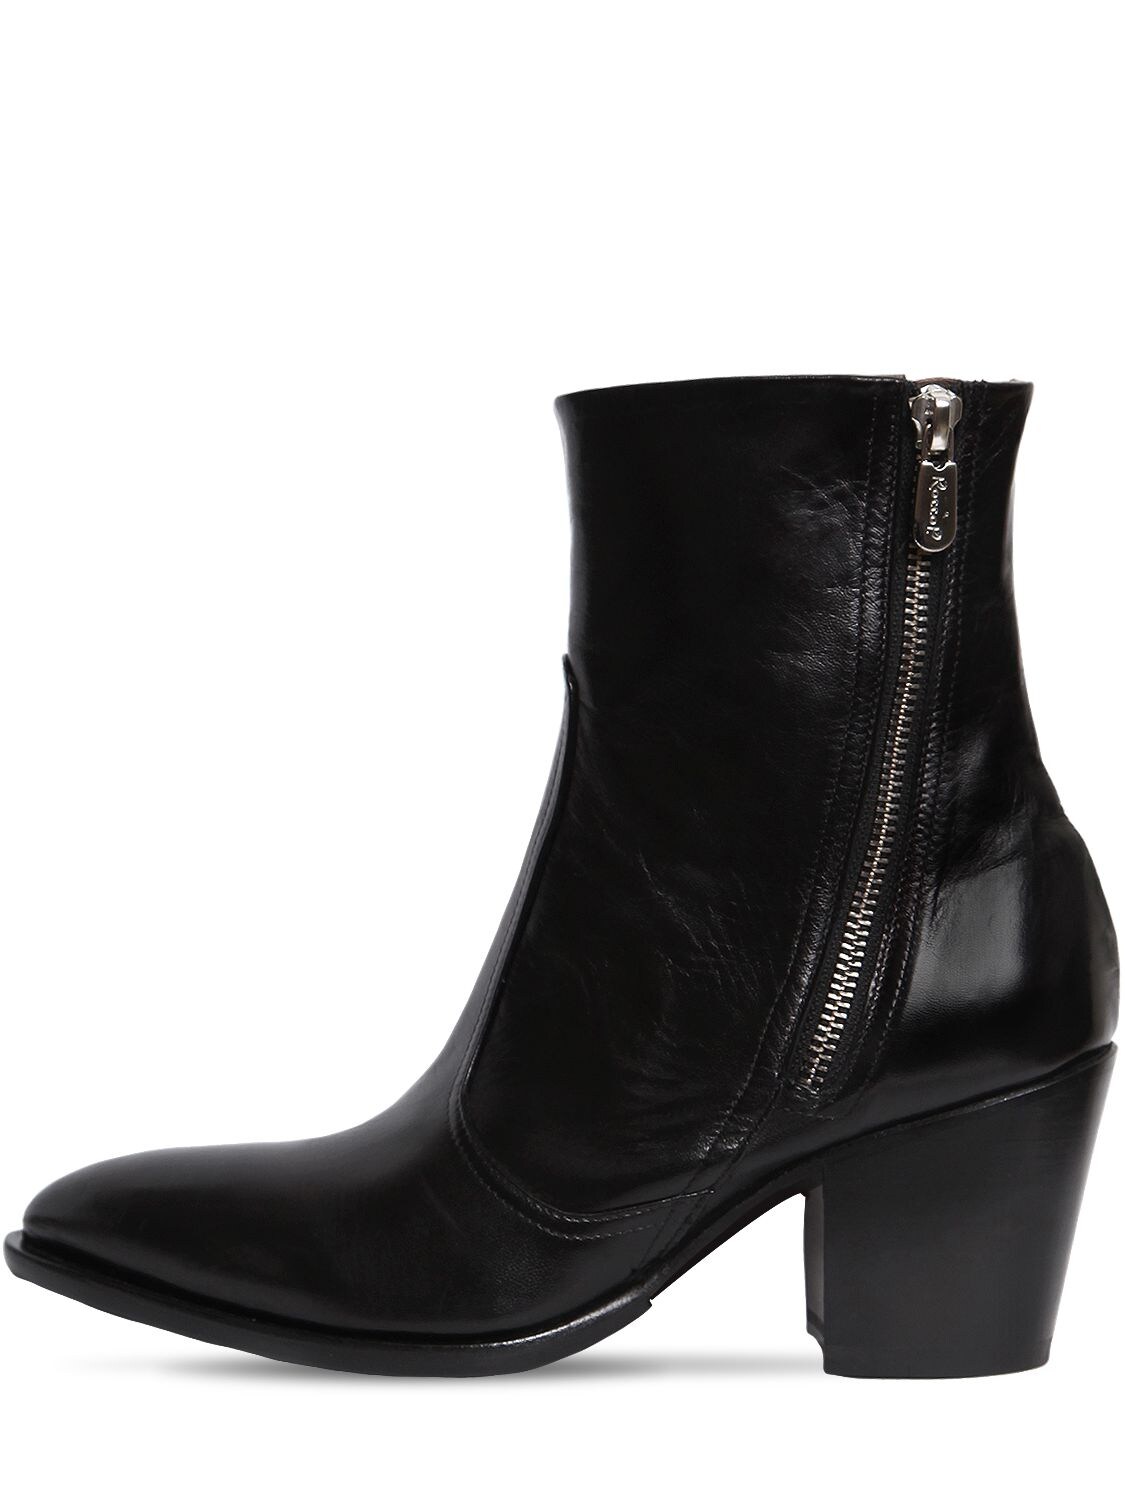 Rocco P 60mm Zipped Leather Ankle Boots In Black